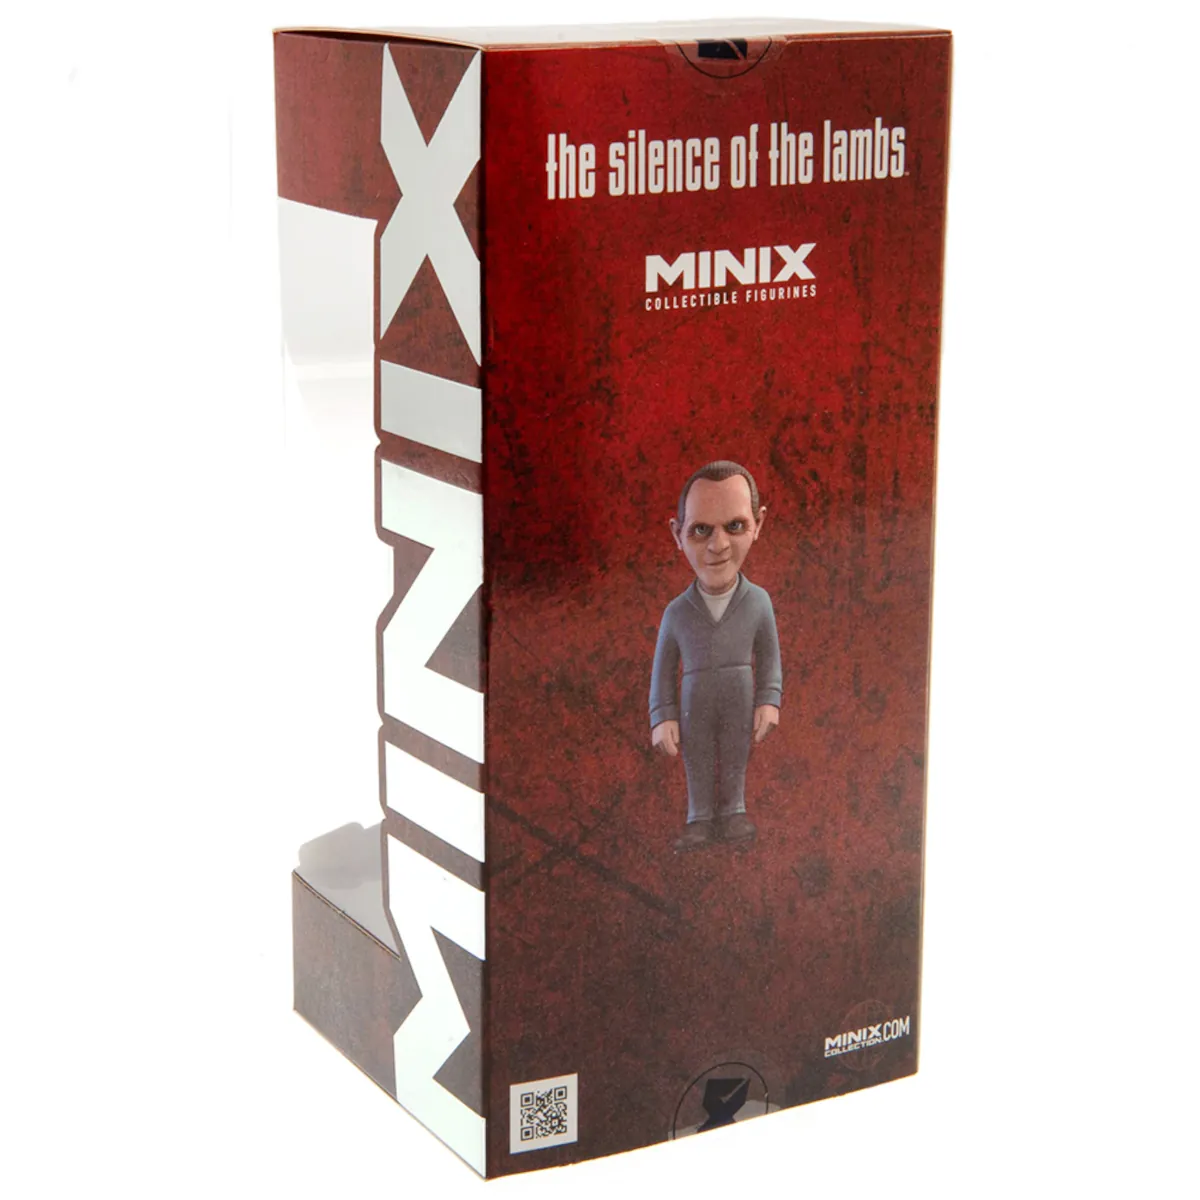 Hannibal Lector The Silence of the Lambs 12cm MINIX Collectable Figure Box Back